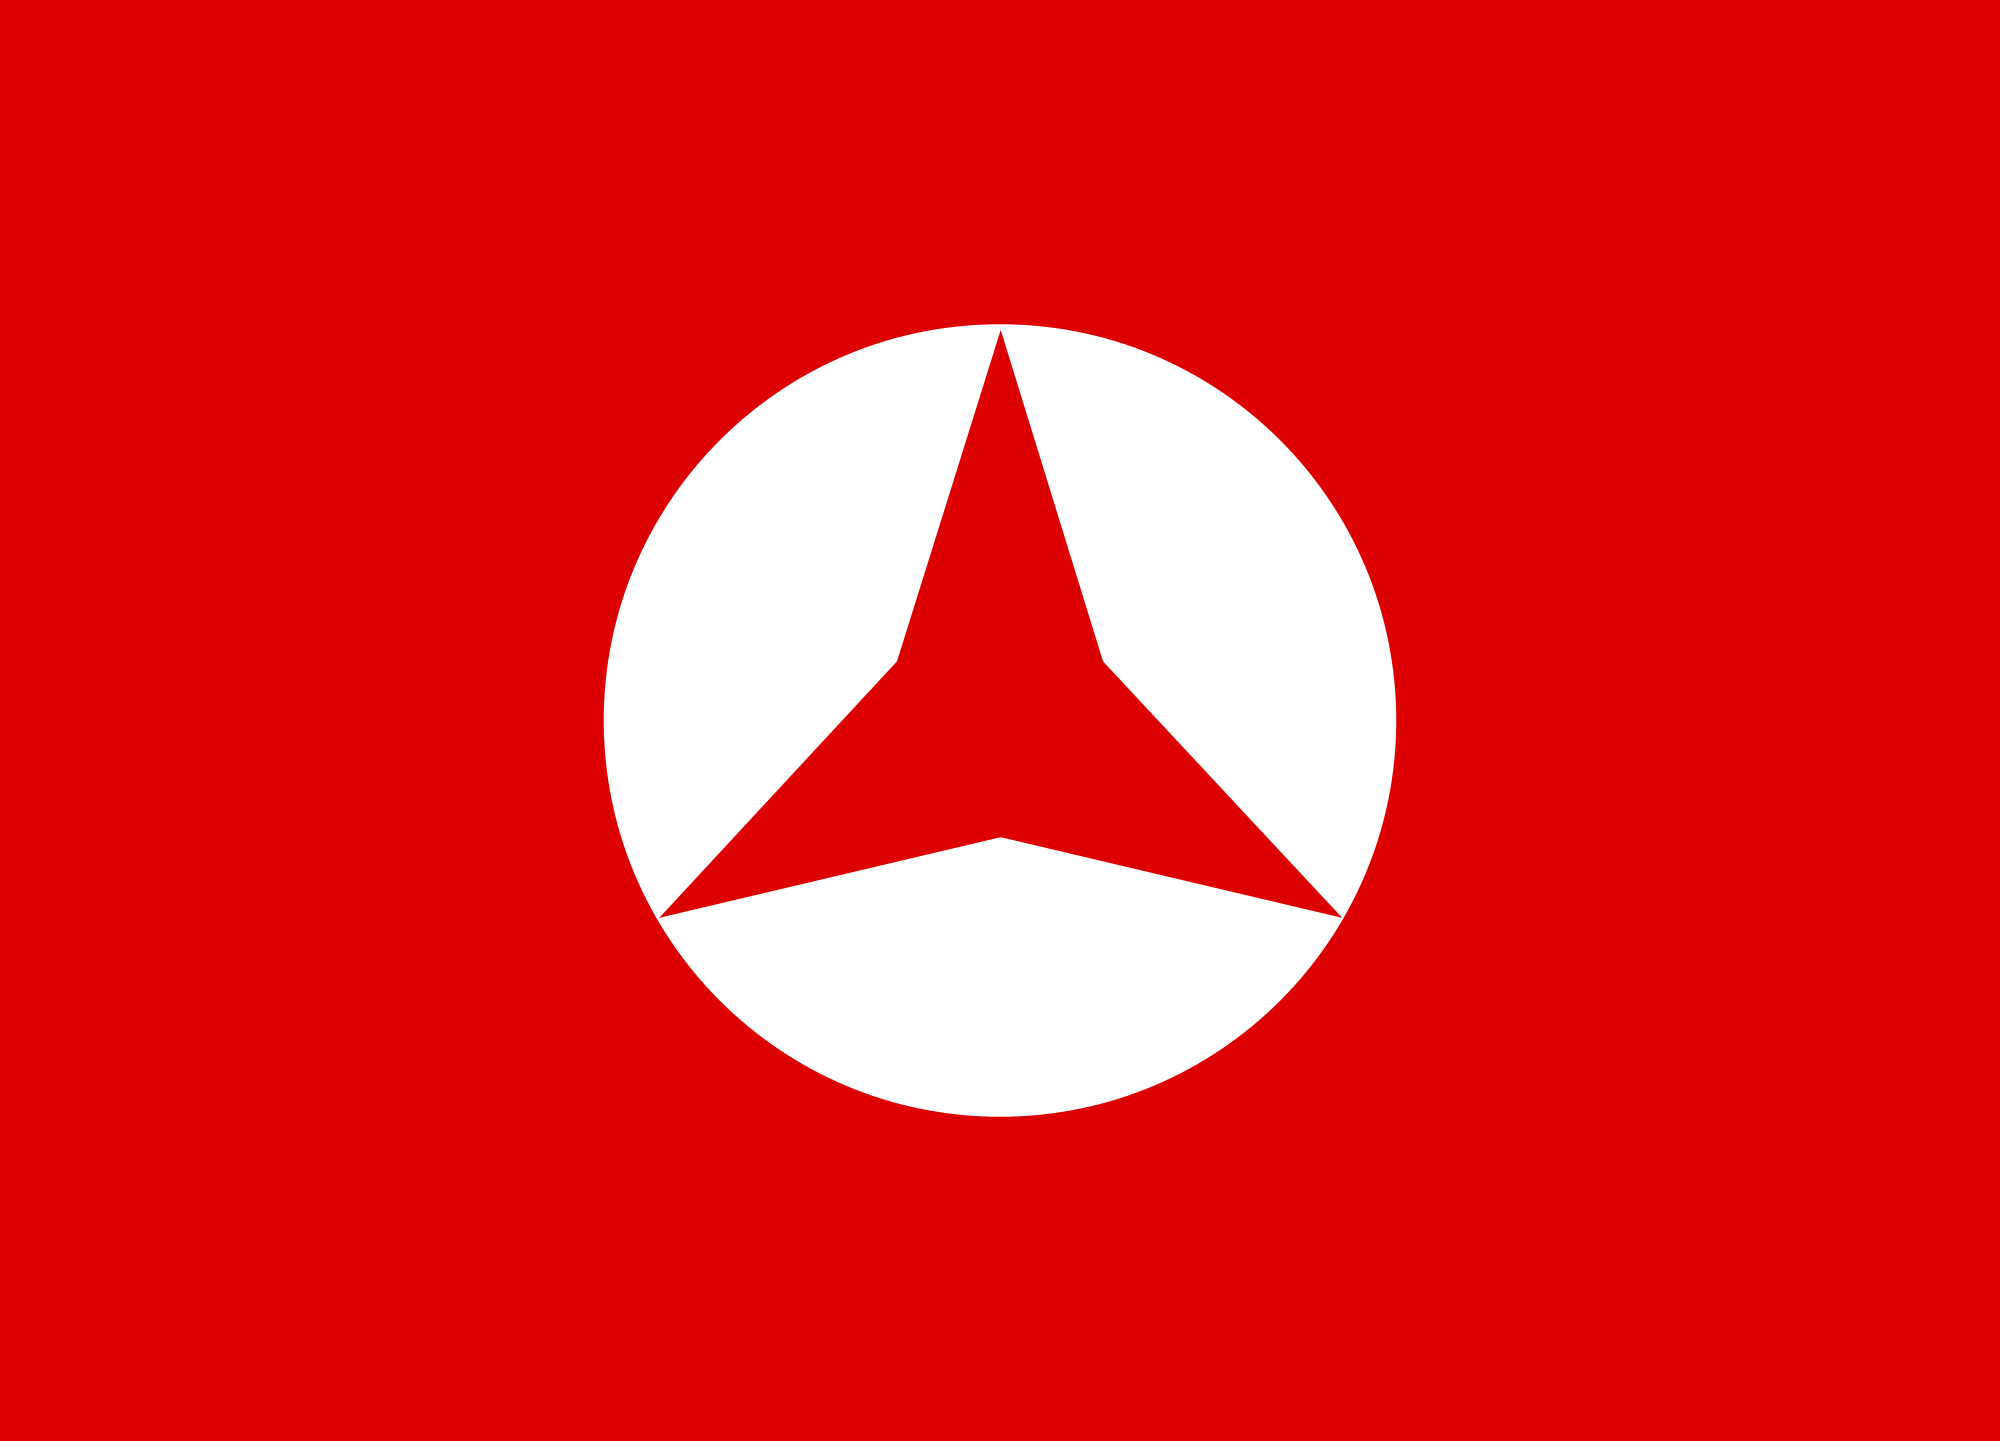 Red 3 Pointed Star Logo - Popular Front (Spain)